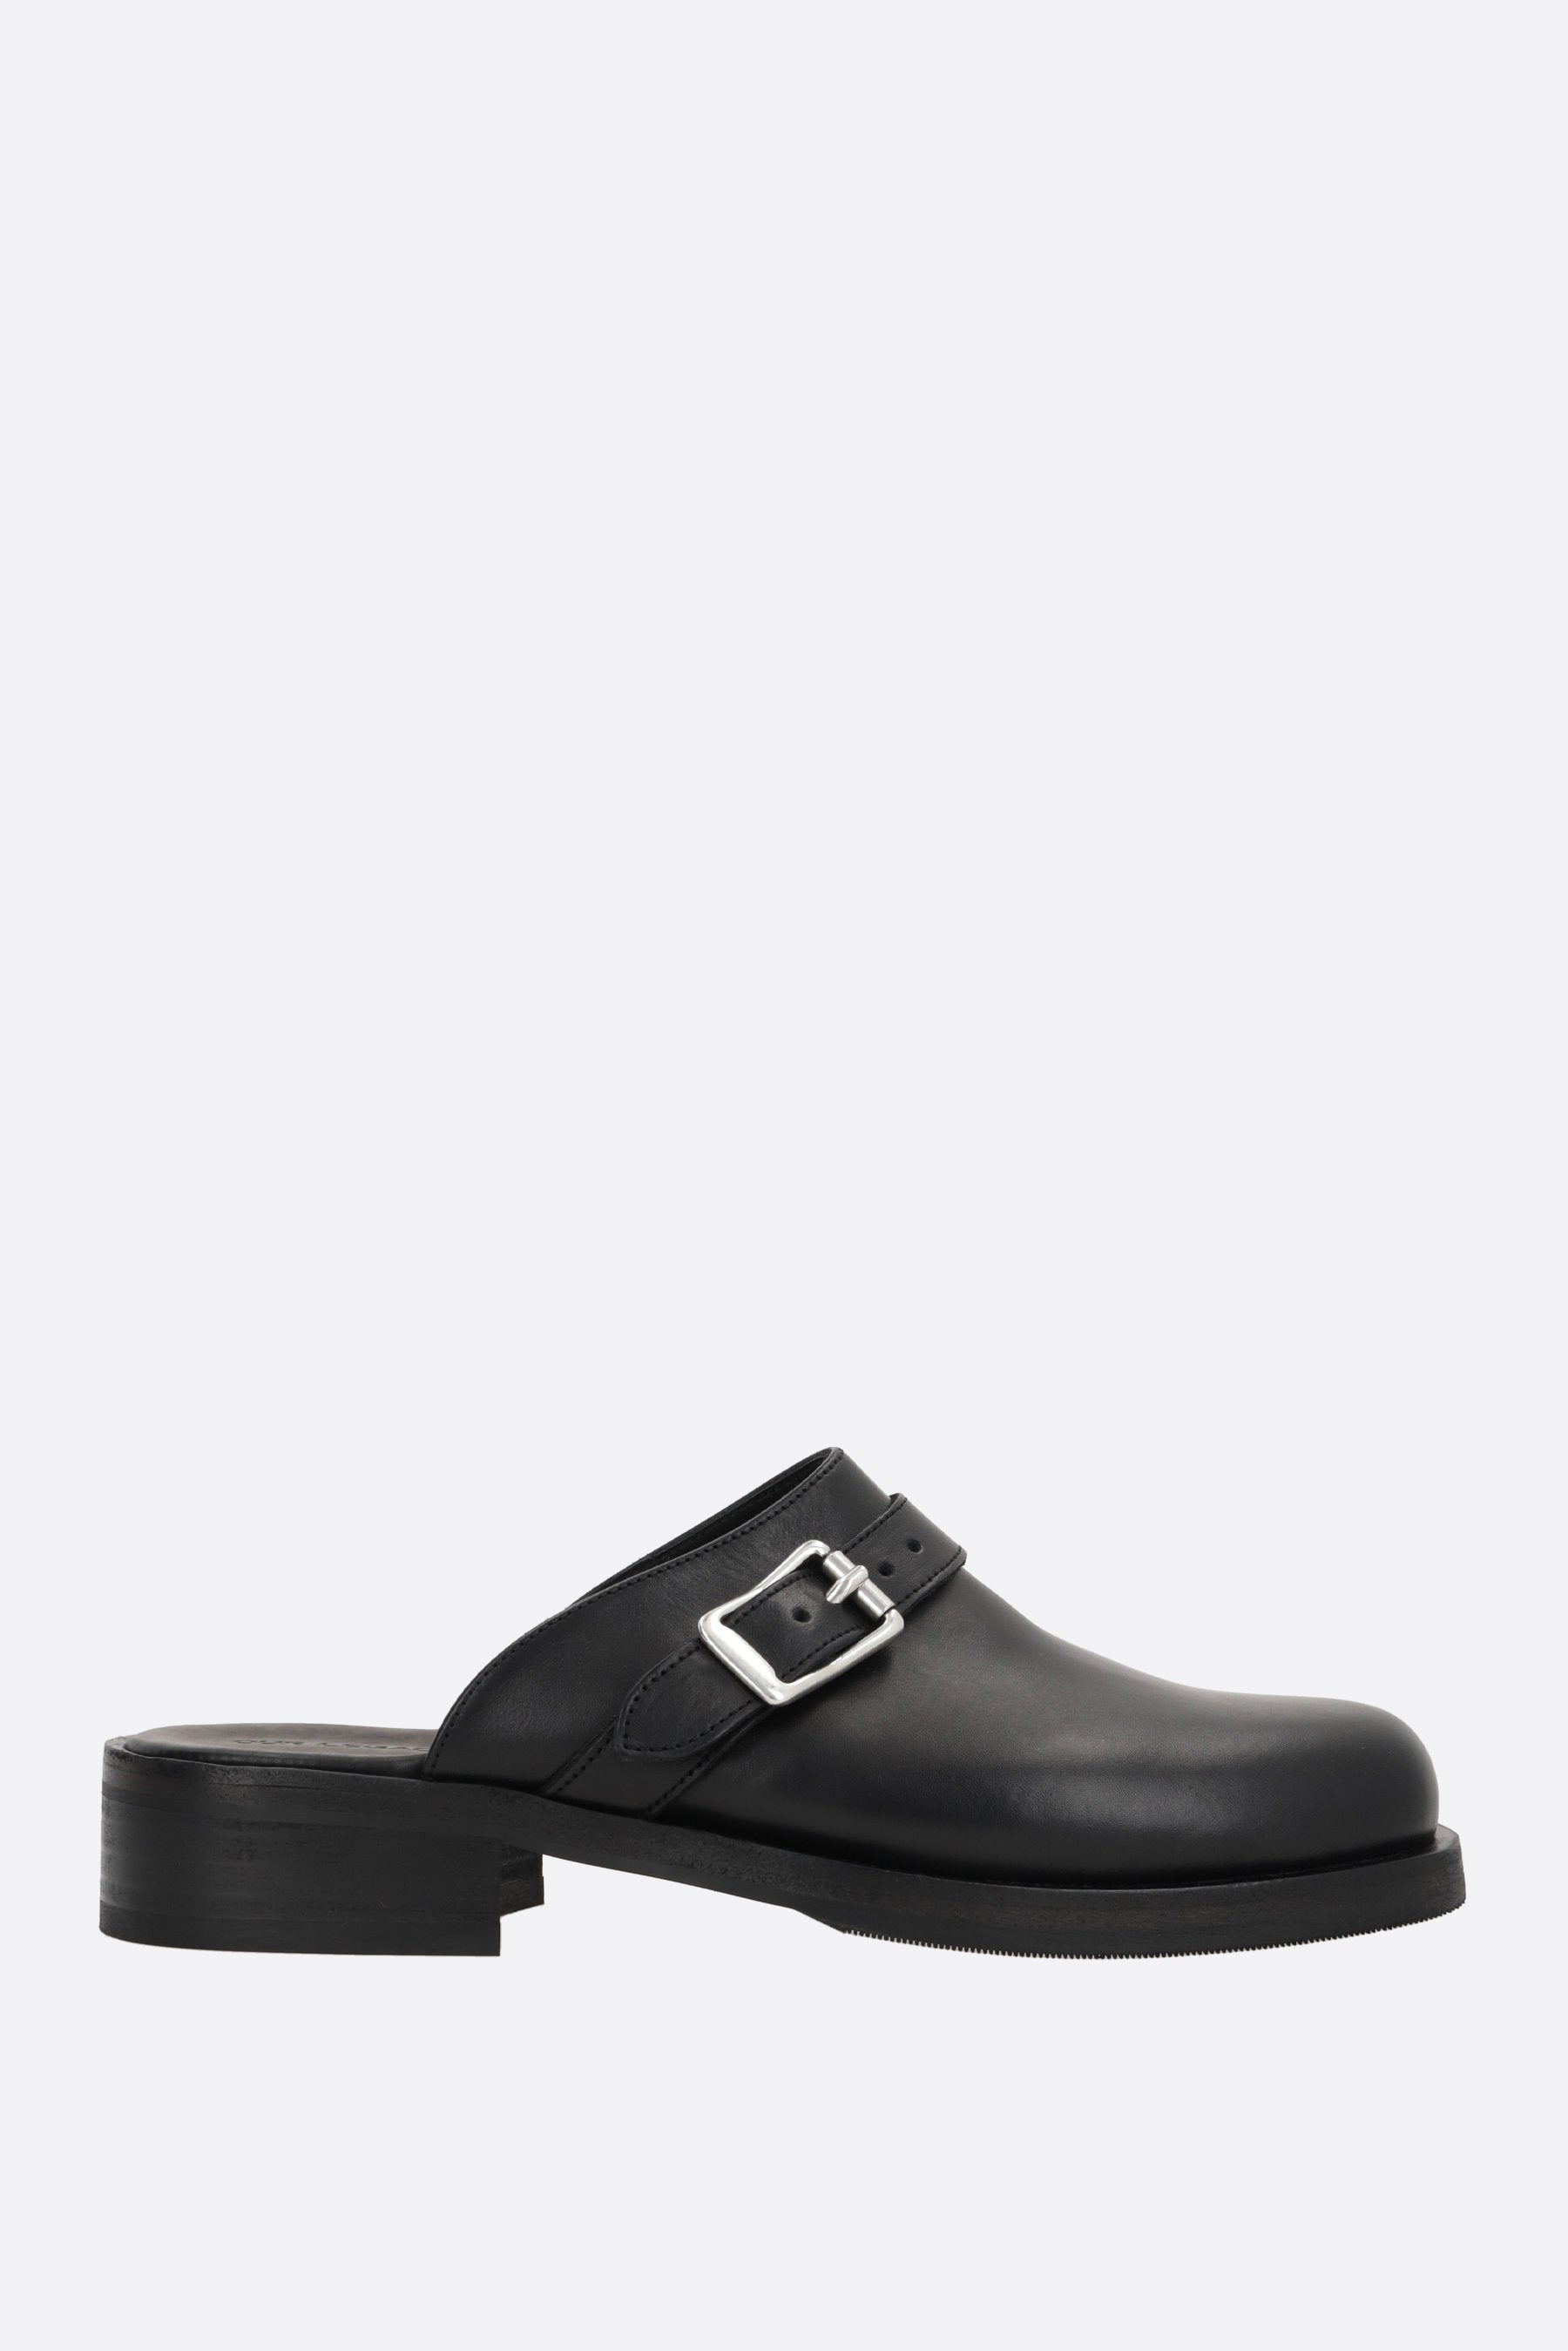 Camion smooth leather flat mules